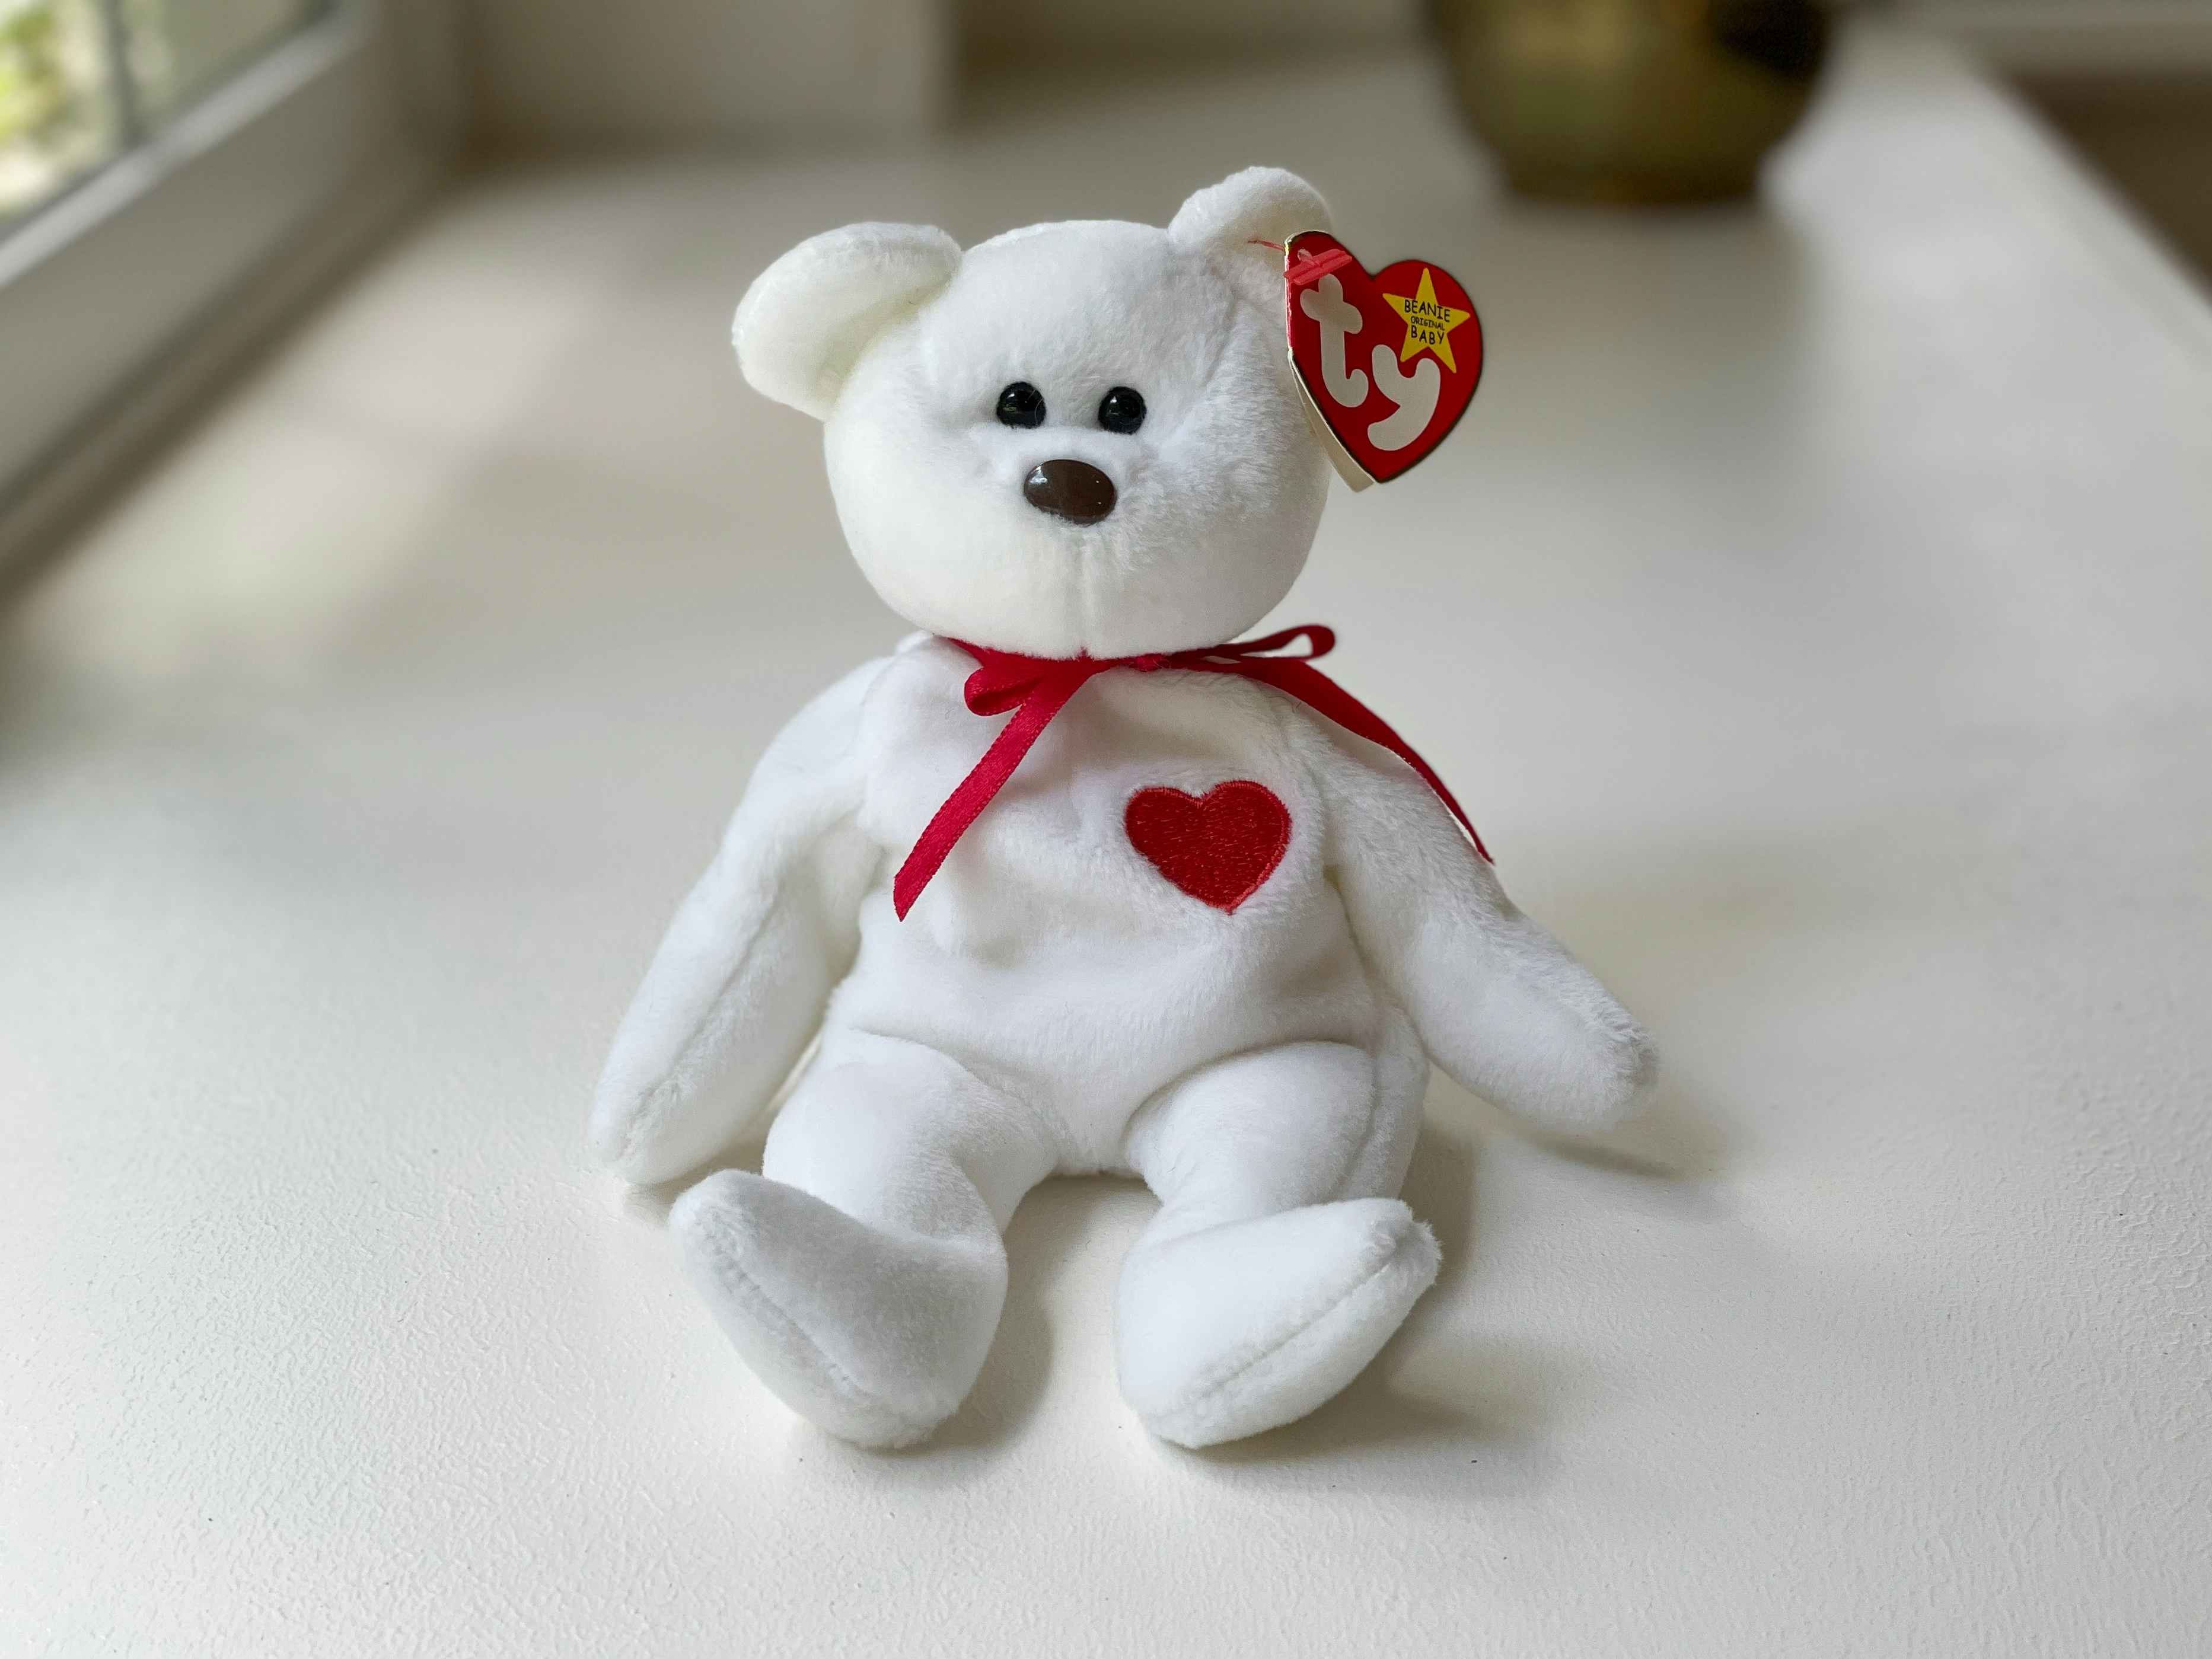 A Valentino the Bear beanie baby sitting on a white table.